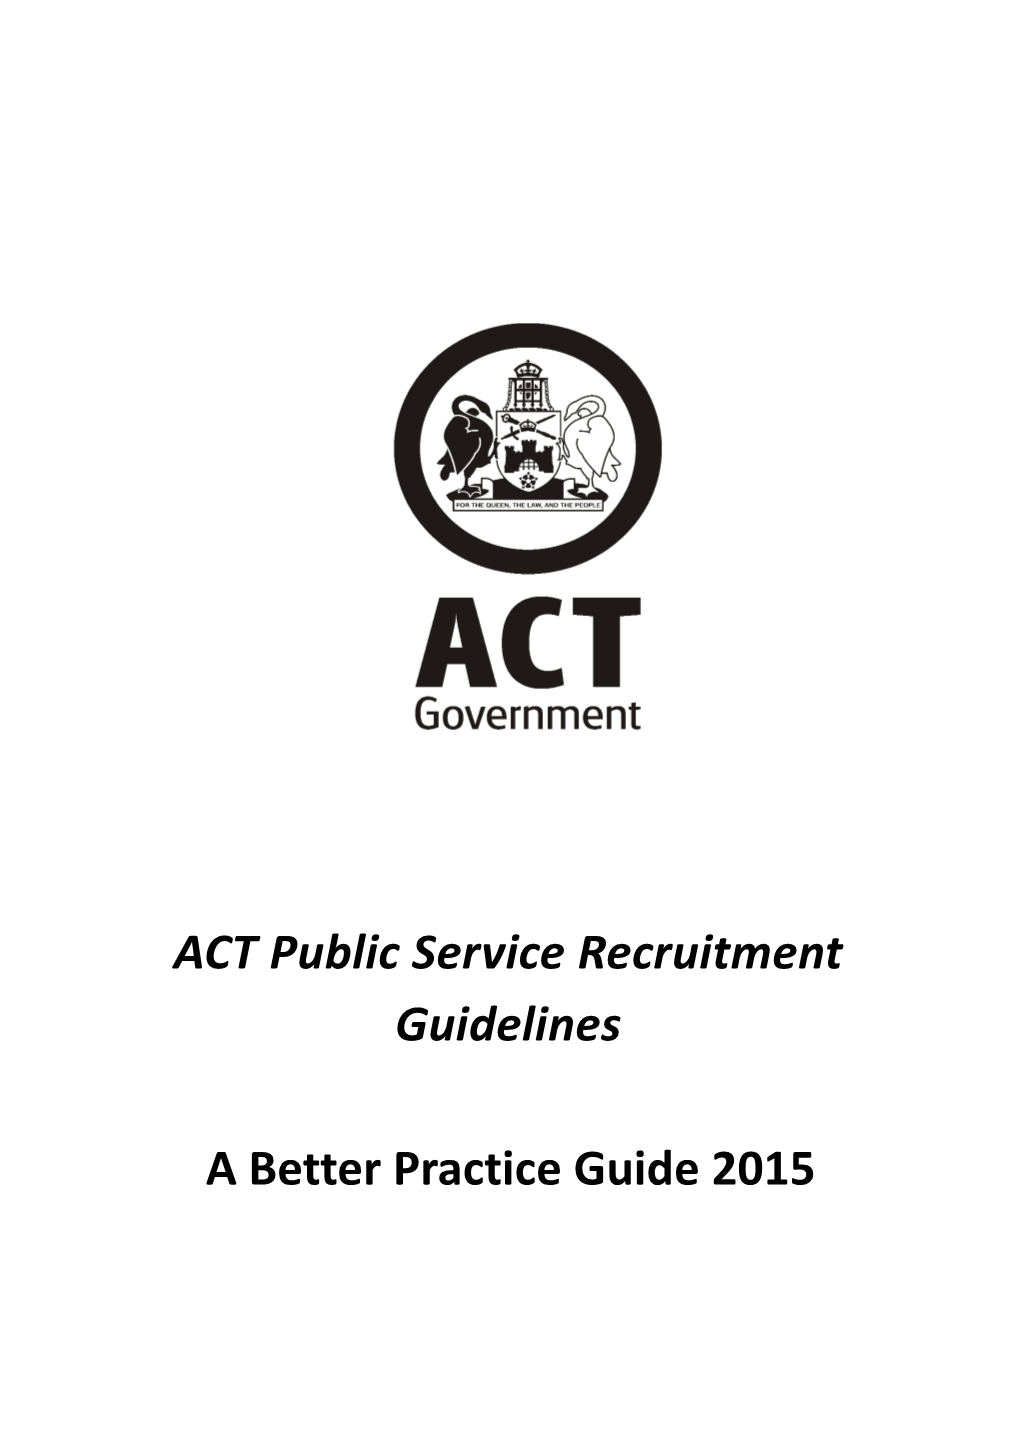 ACT Public Service Recruitment Guidelines, A Better Practice Guide 2015